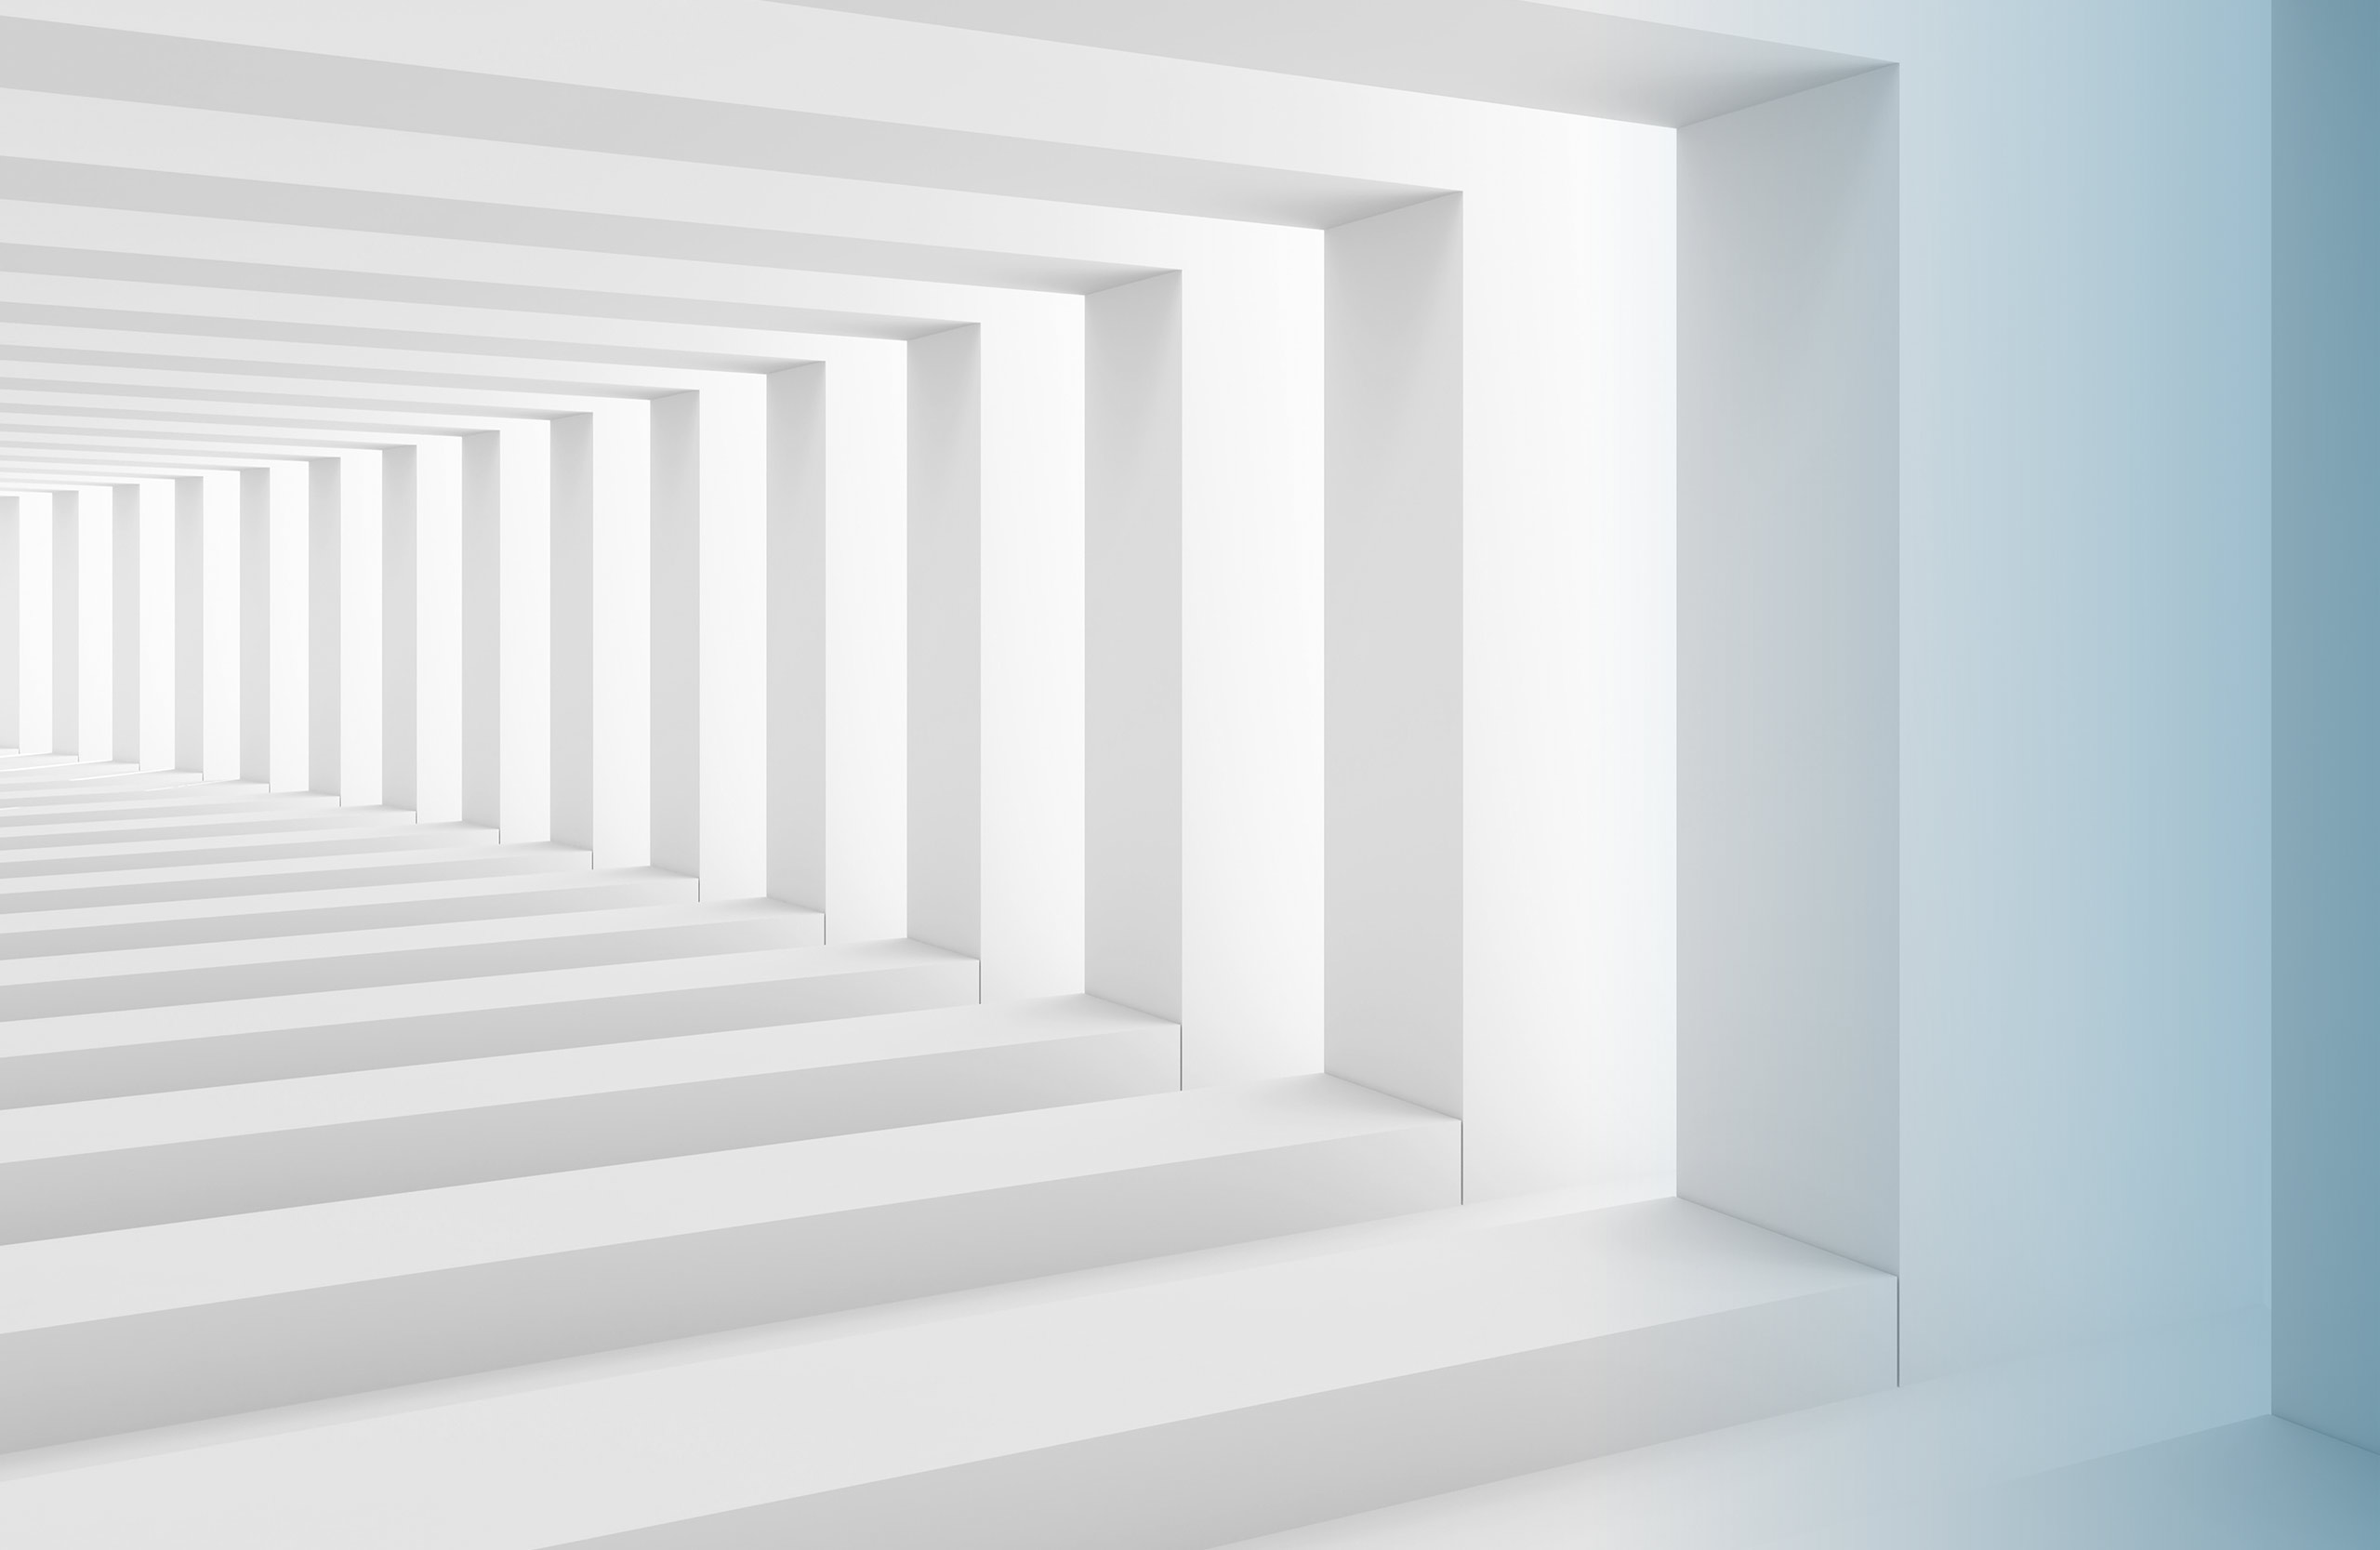 An abstract image of white columns.